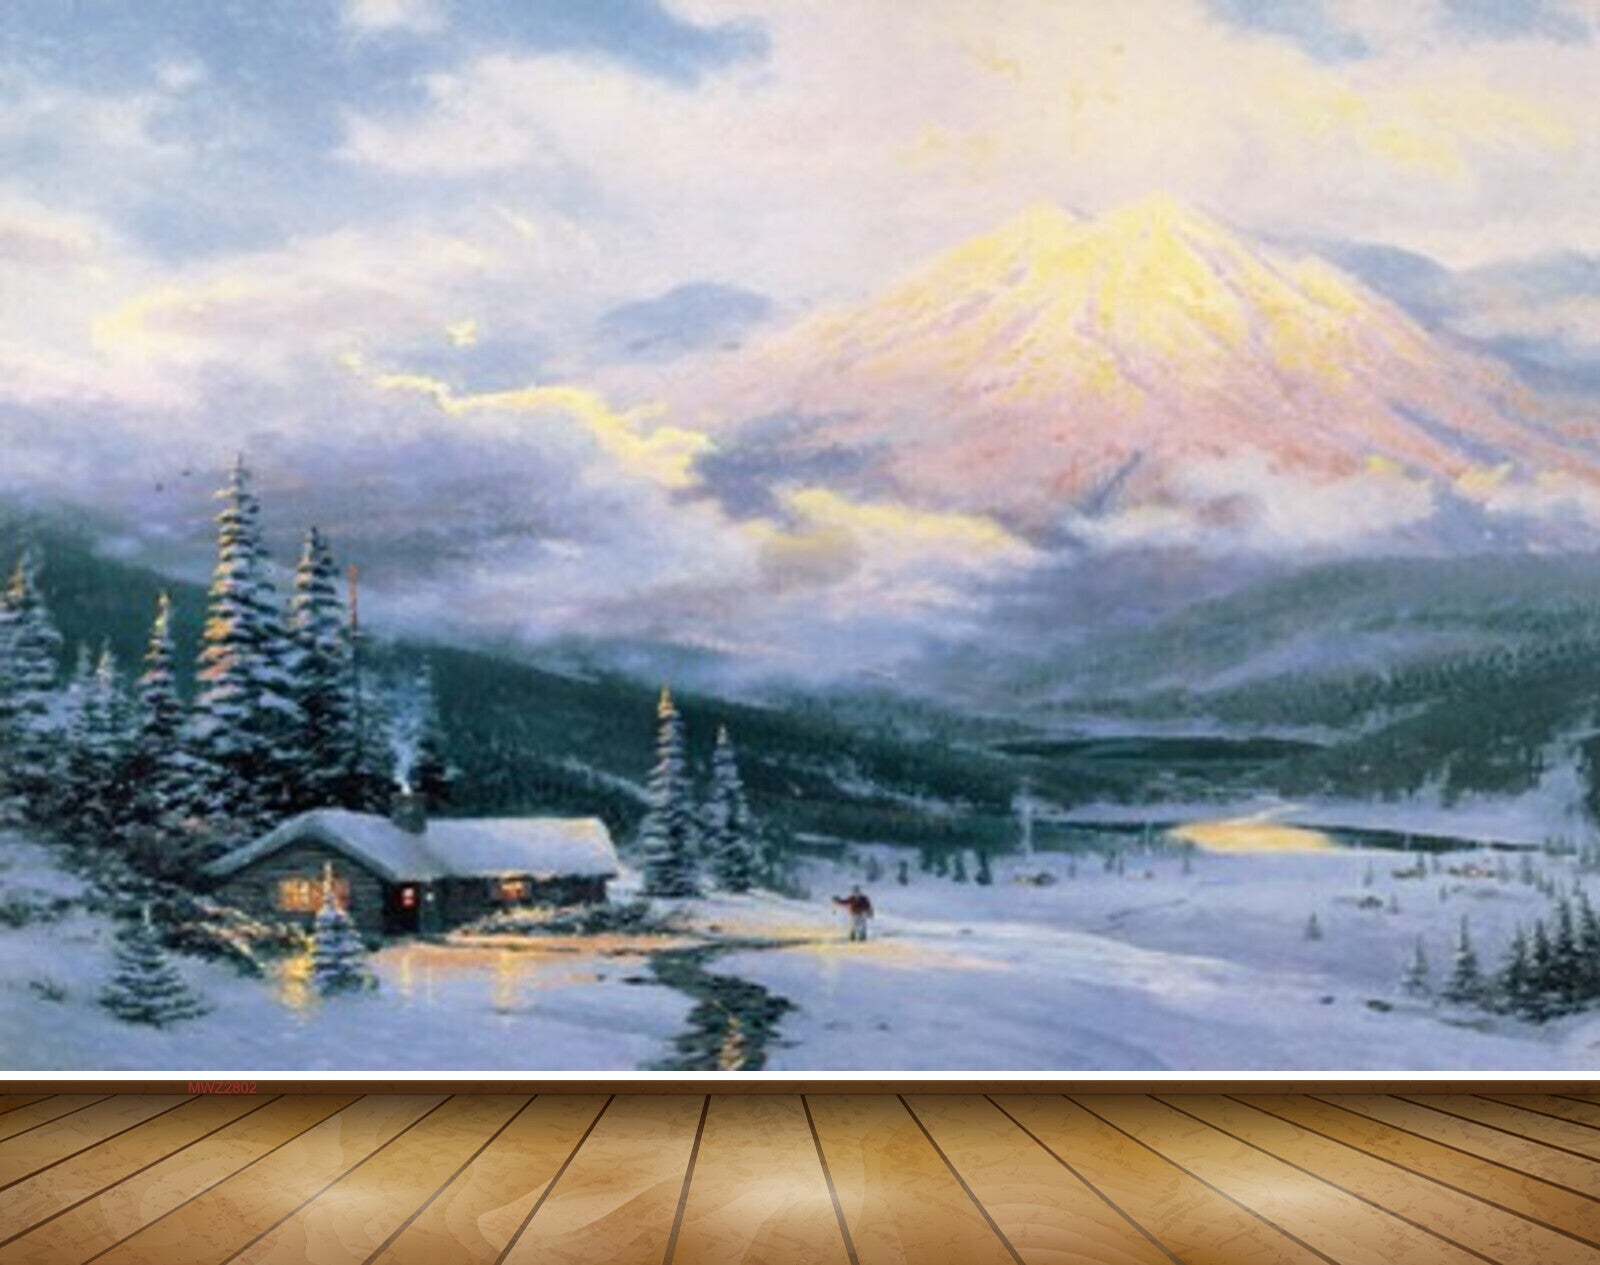 Avikalp MWZ2802 Sky Mountains Trees Houses Man Clouds Snow Road Painting HD Wallpaper